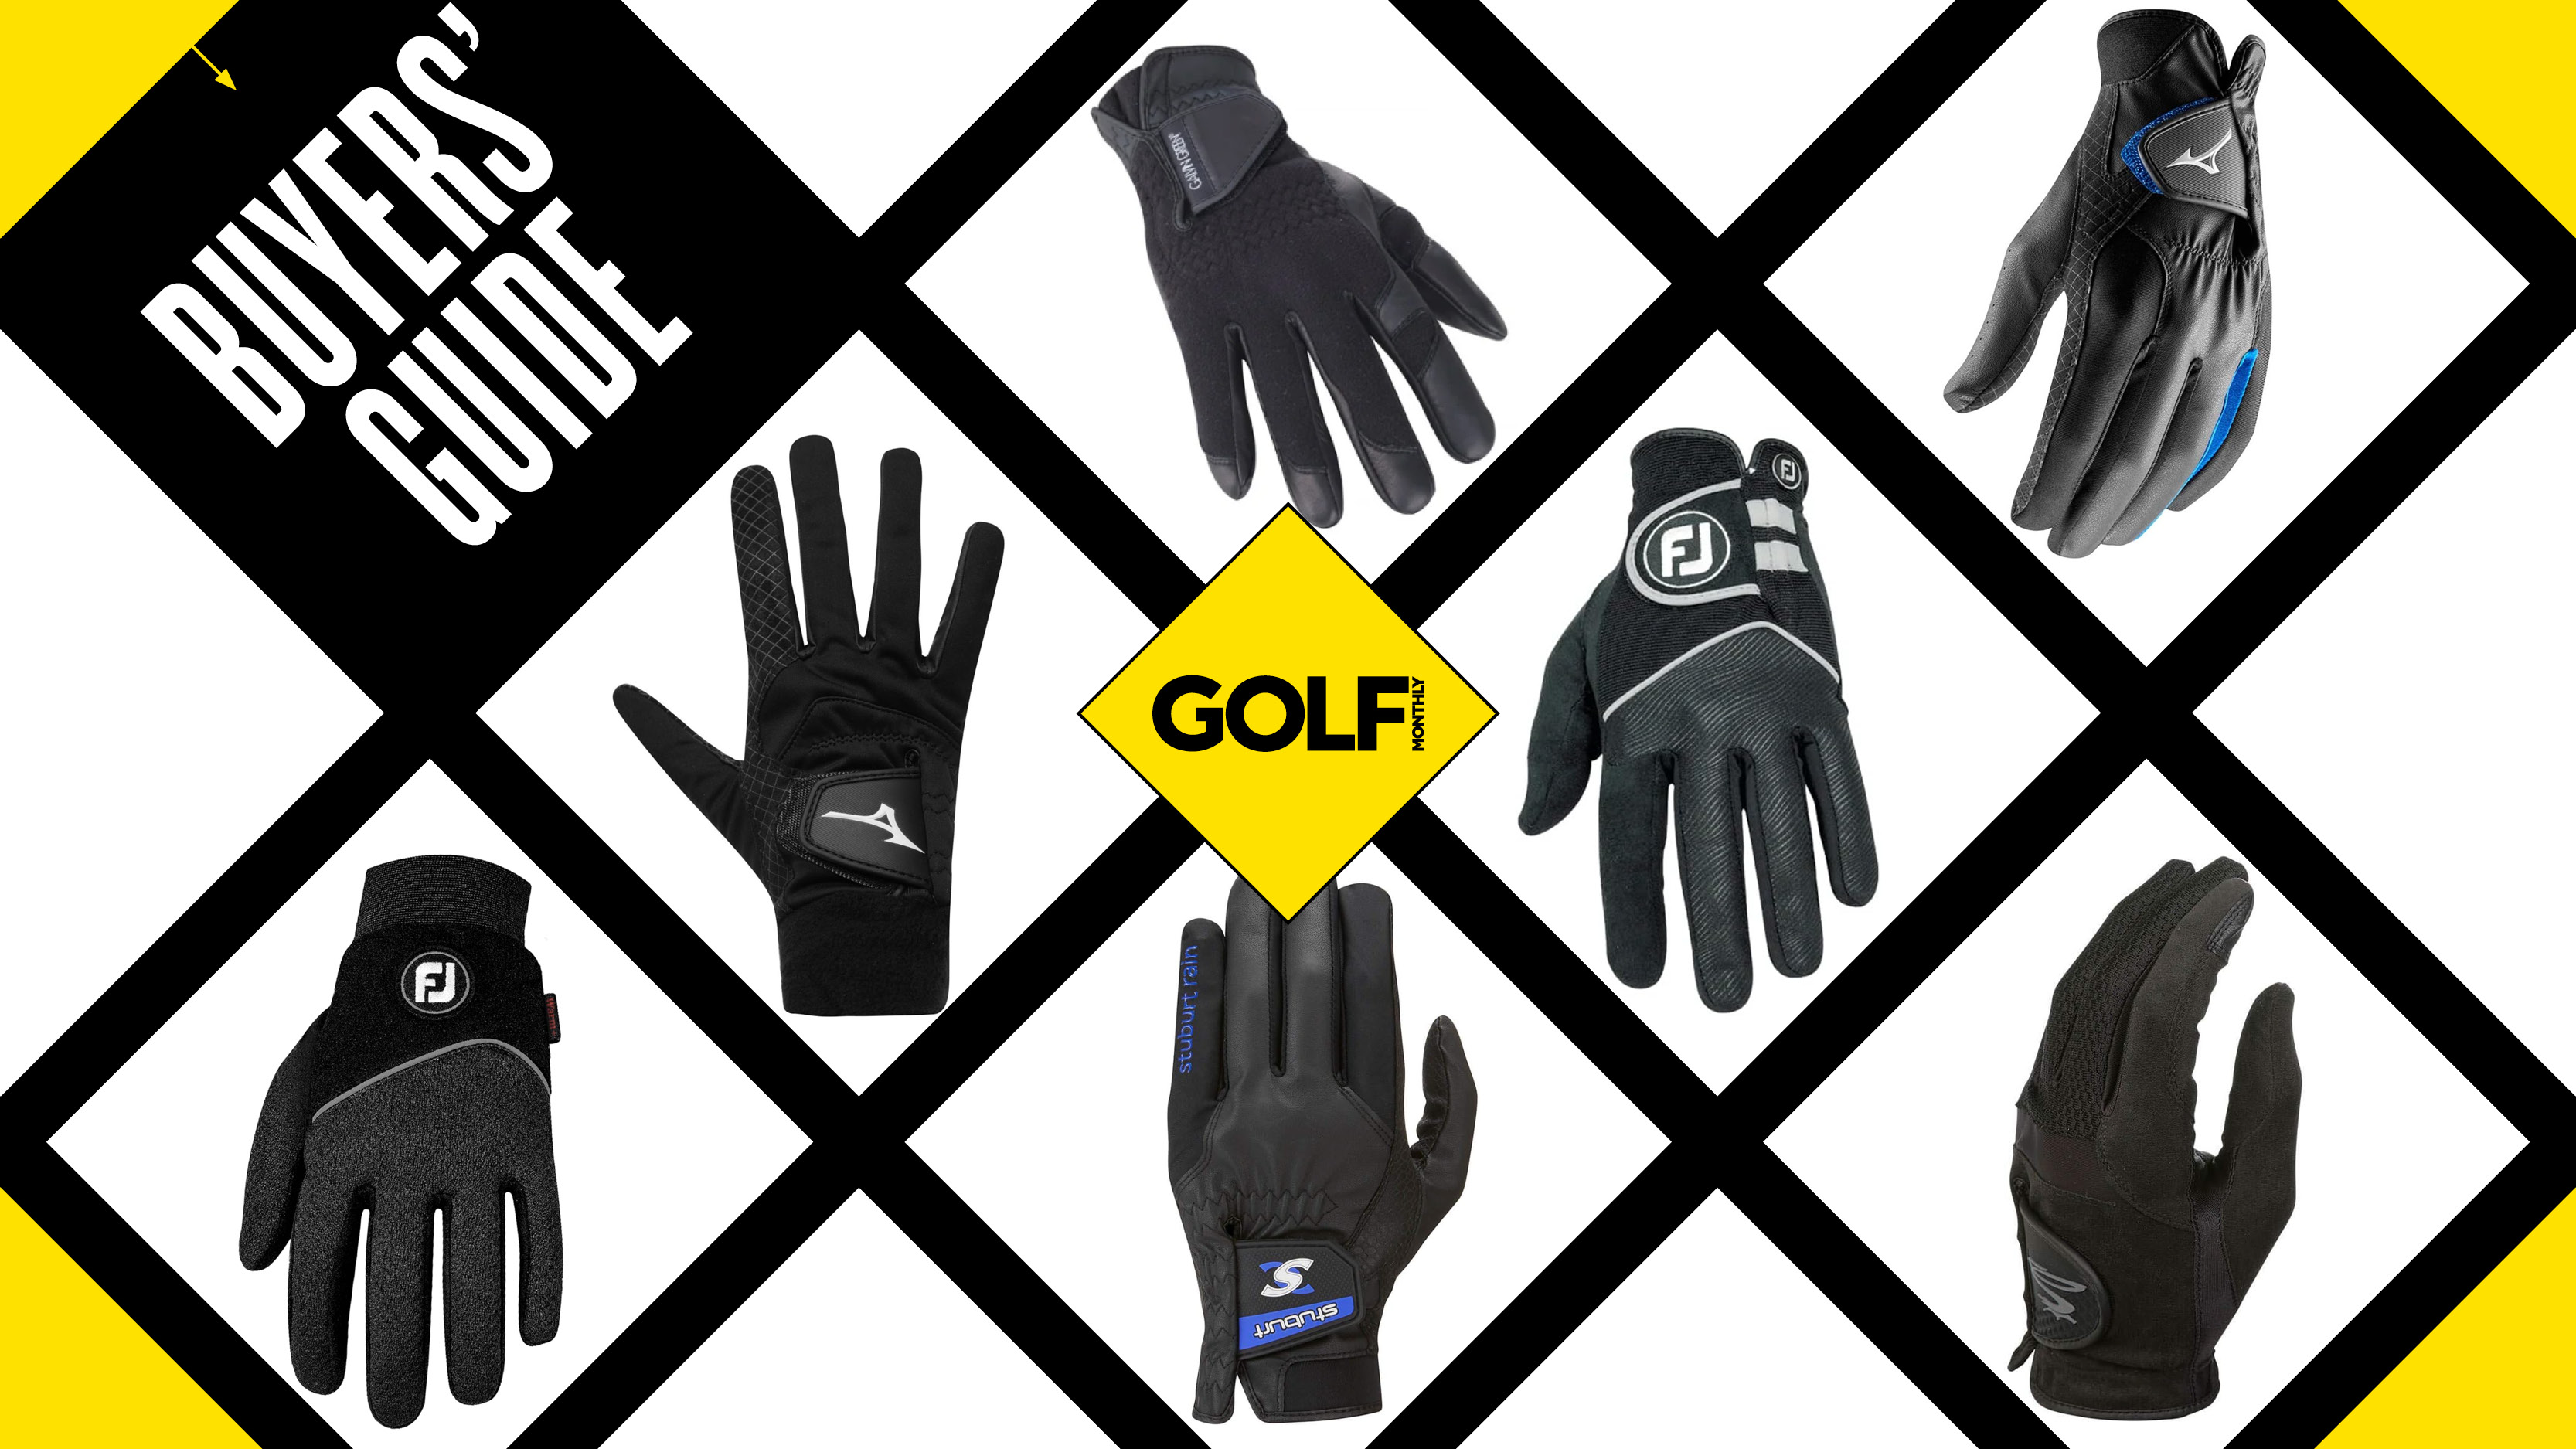 Finding the Perfect Fit: Tips for Selecting Hand Gloves for Winter